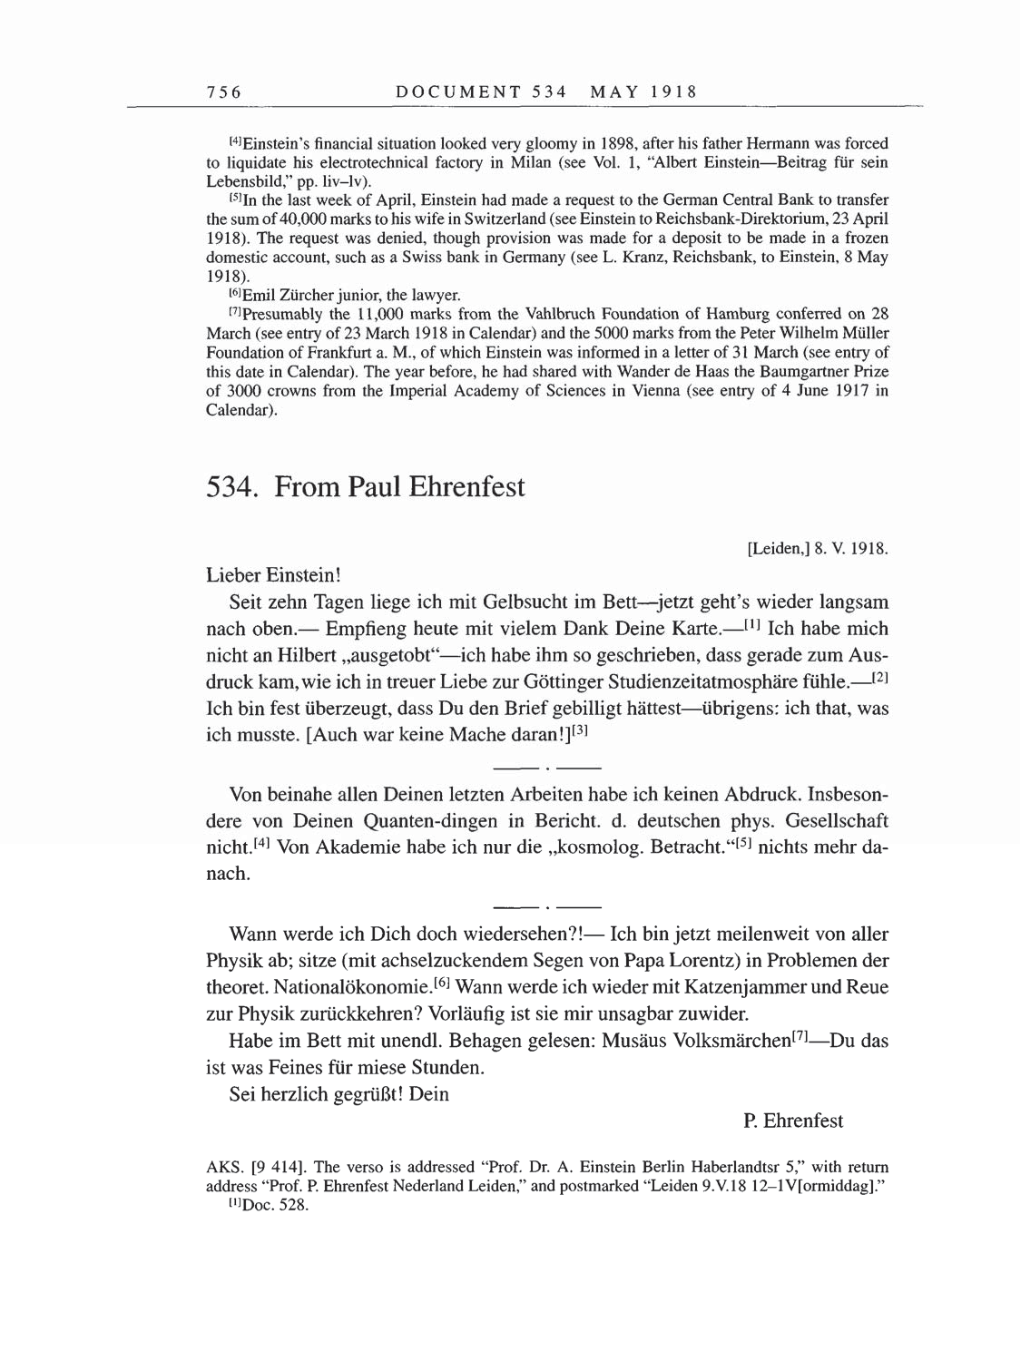 Volume 8, Part B: The Berlin Years: Correspondence 1918 page 756